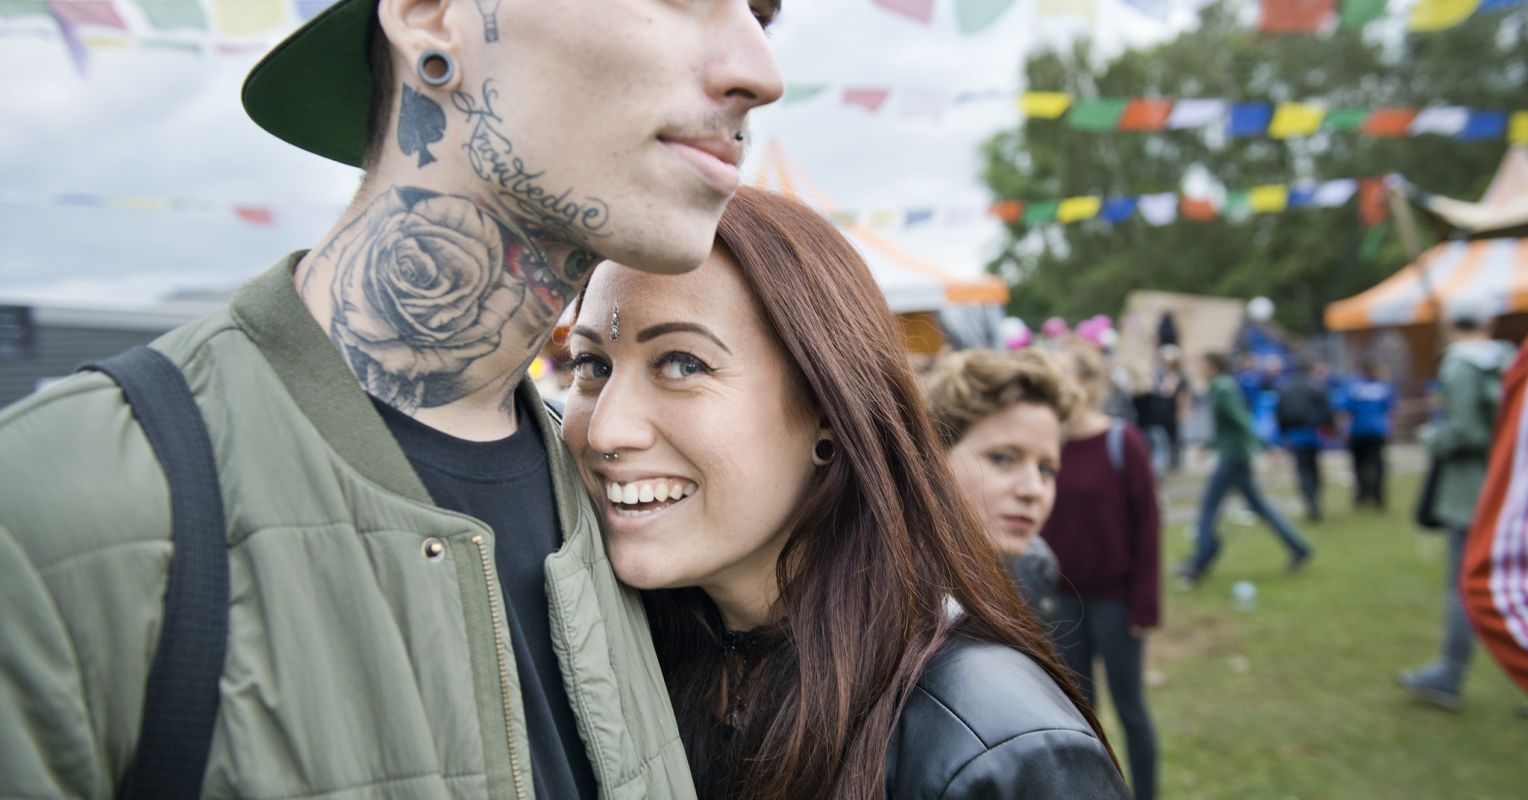 Are Women More Attracted to Men With Tattoos? | Psychology Today